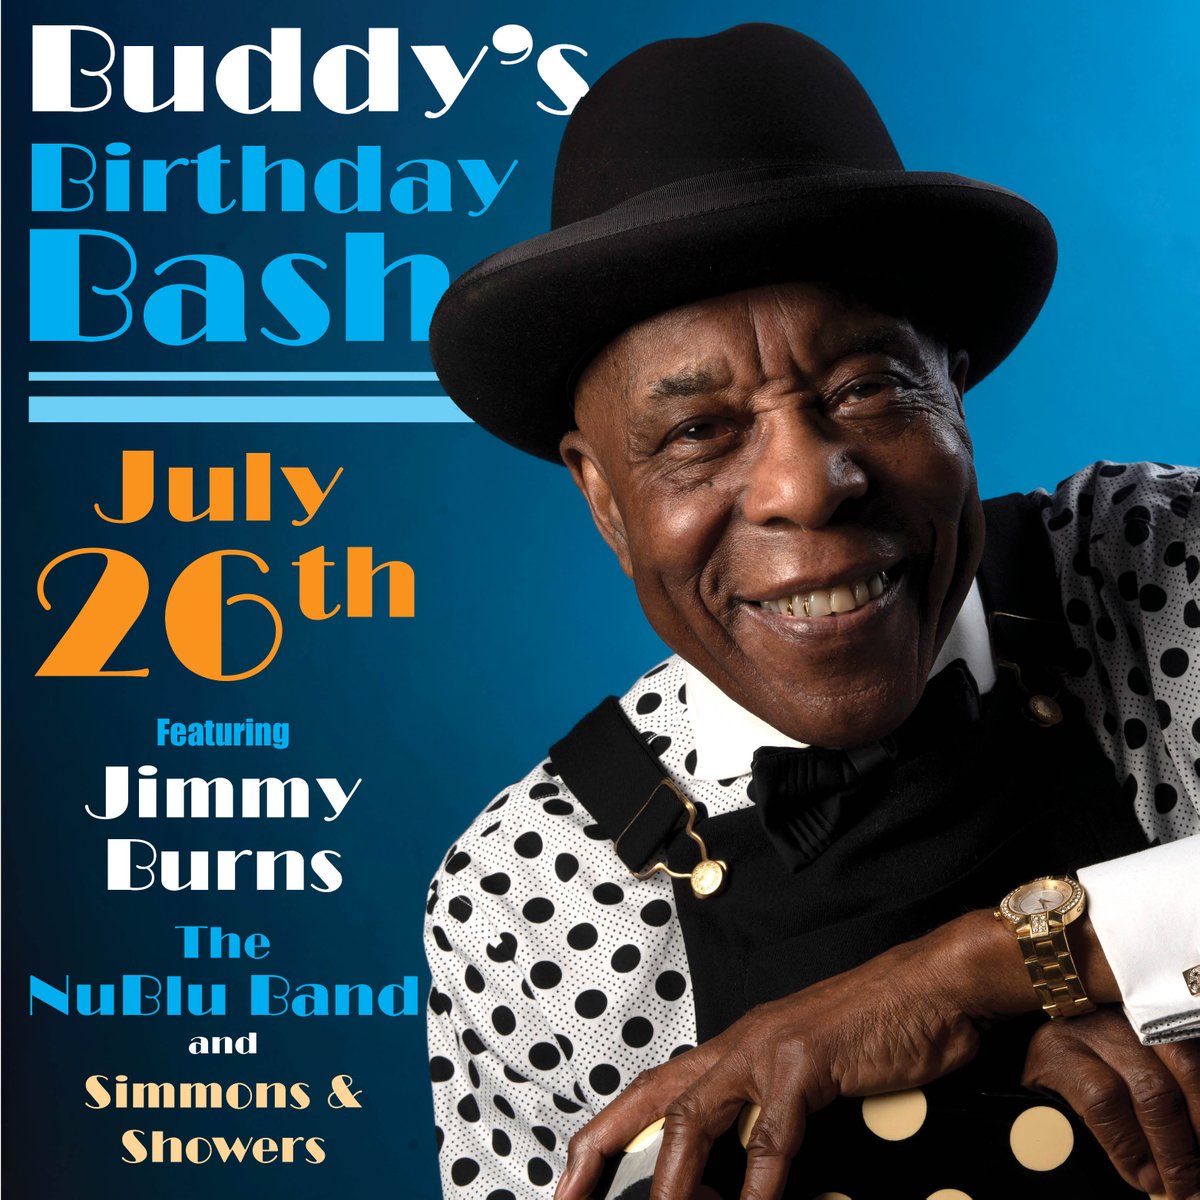 87 YEARS YOUNG: Join us in Chicago at Buddy Guy's Legends on Wednesday July 26th for Buddy's 87th Birthday! The man himself will be in the house and performances will feature Jimmy Burns, The NuBlu Band, and Simmons & Showers. Tickets at buddyguy.com